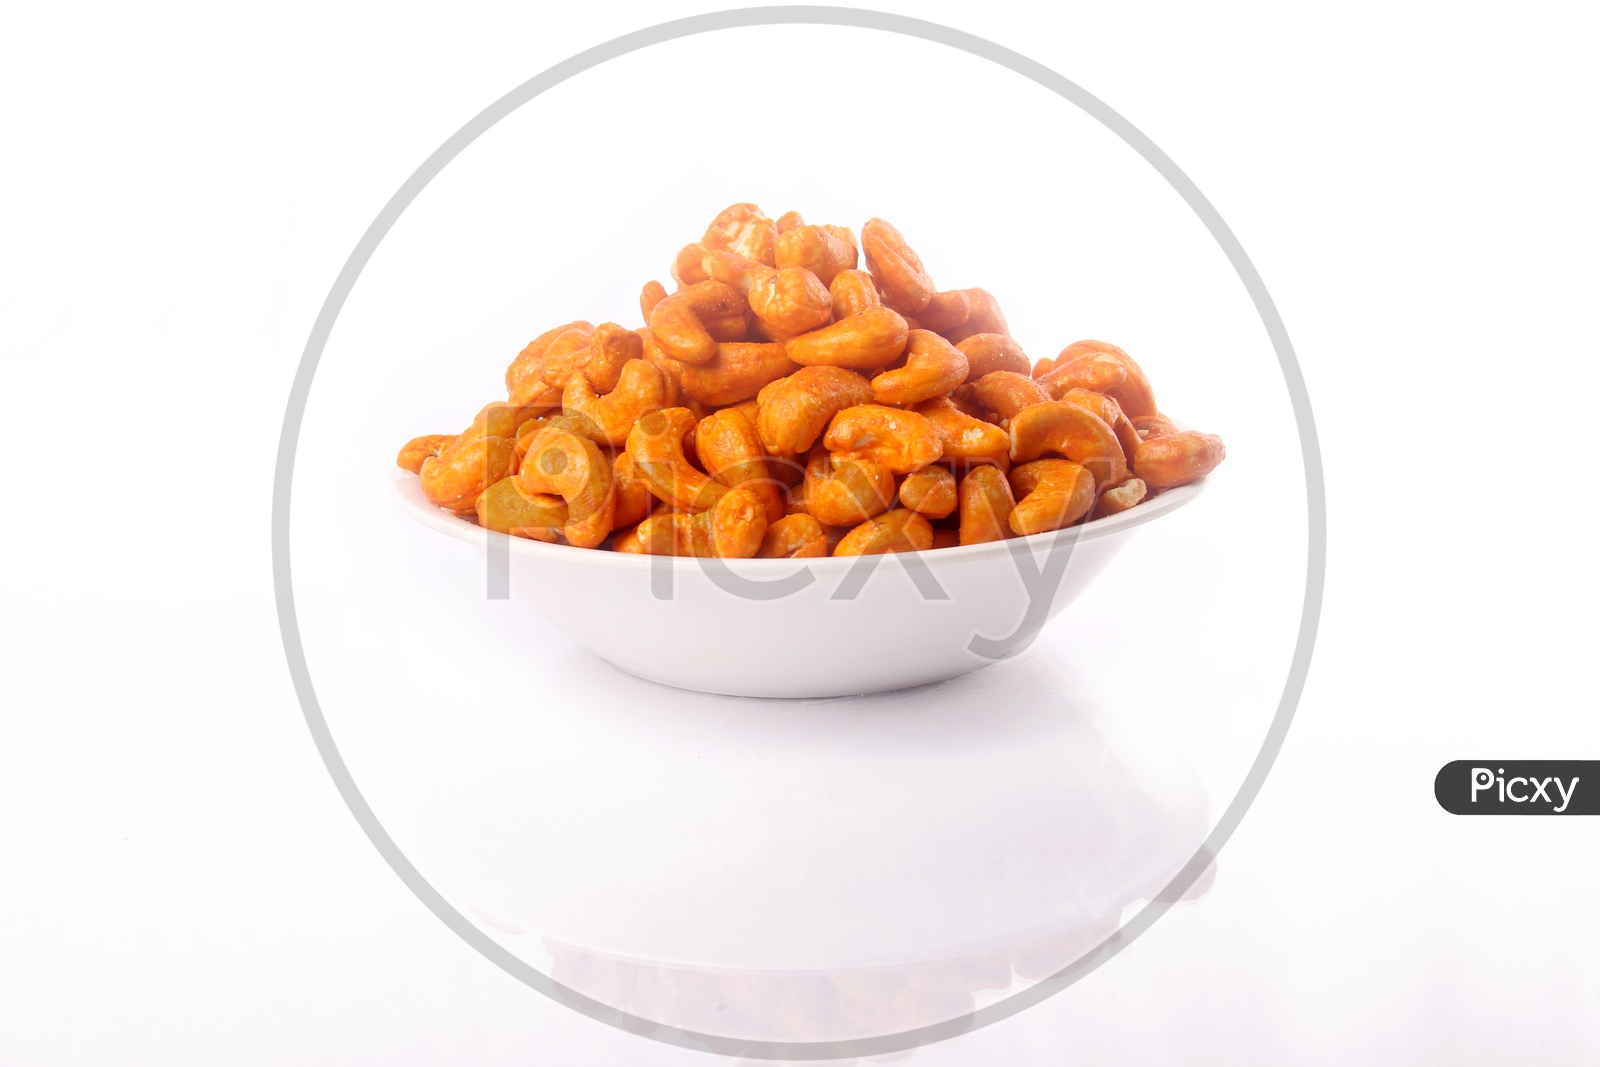 Spicy Roasted Cashew Nuts In a Bowl On an Isolated White Background